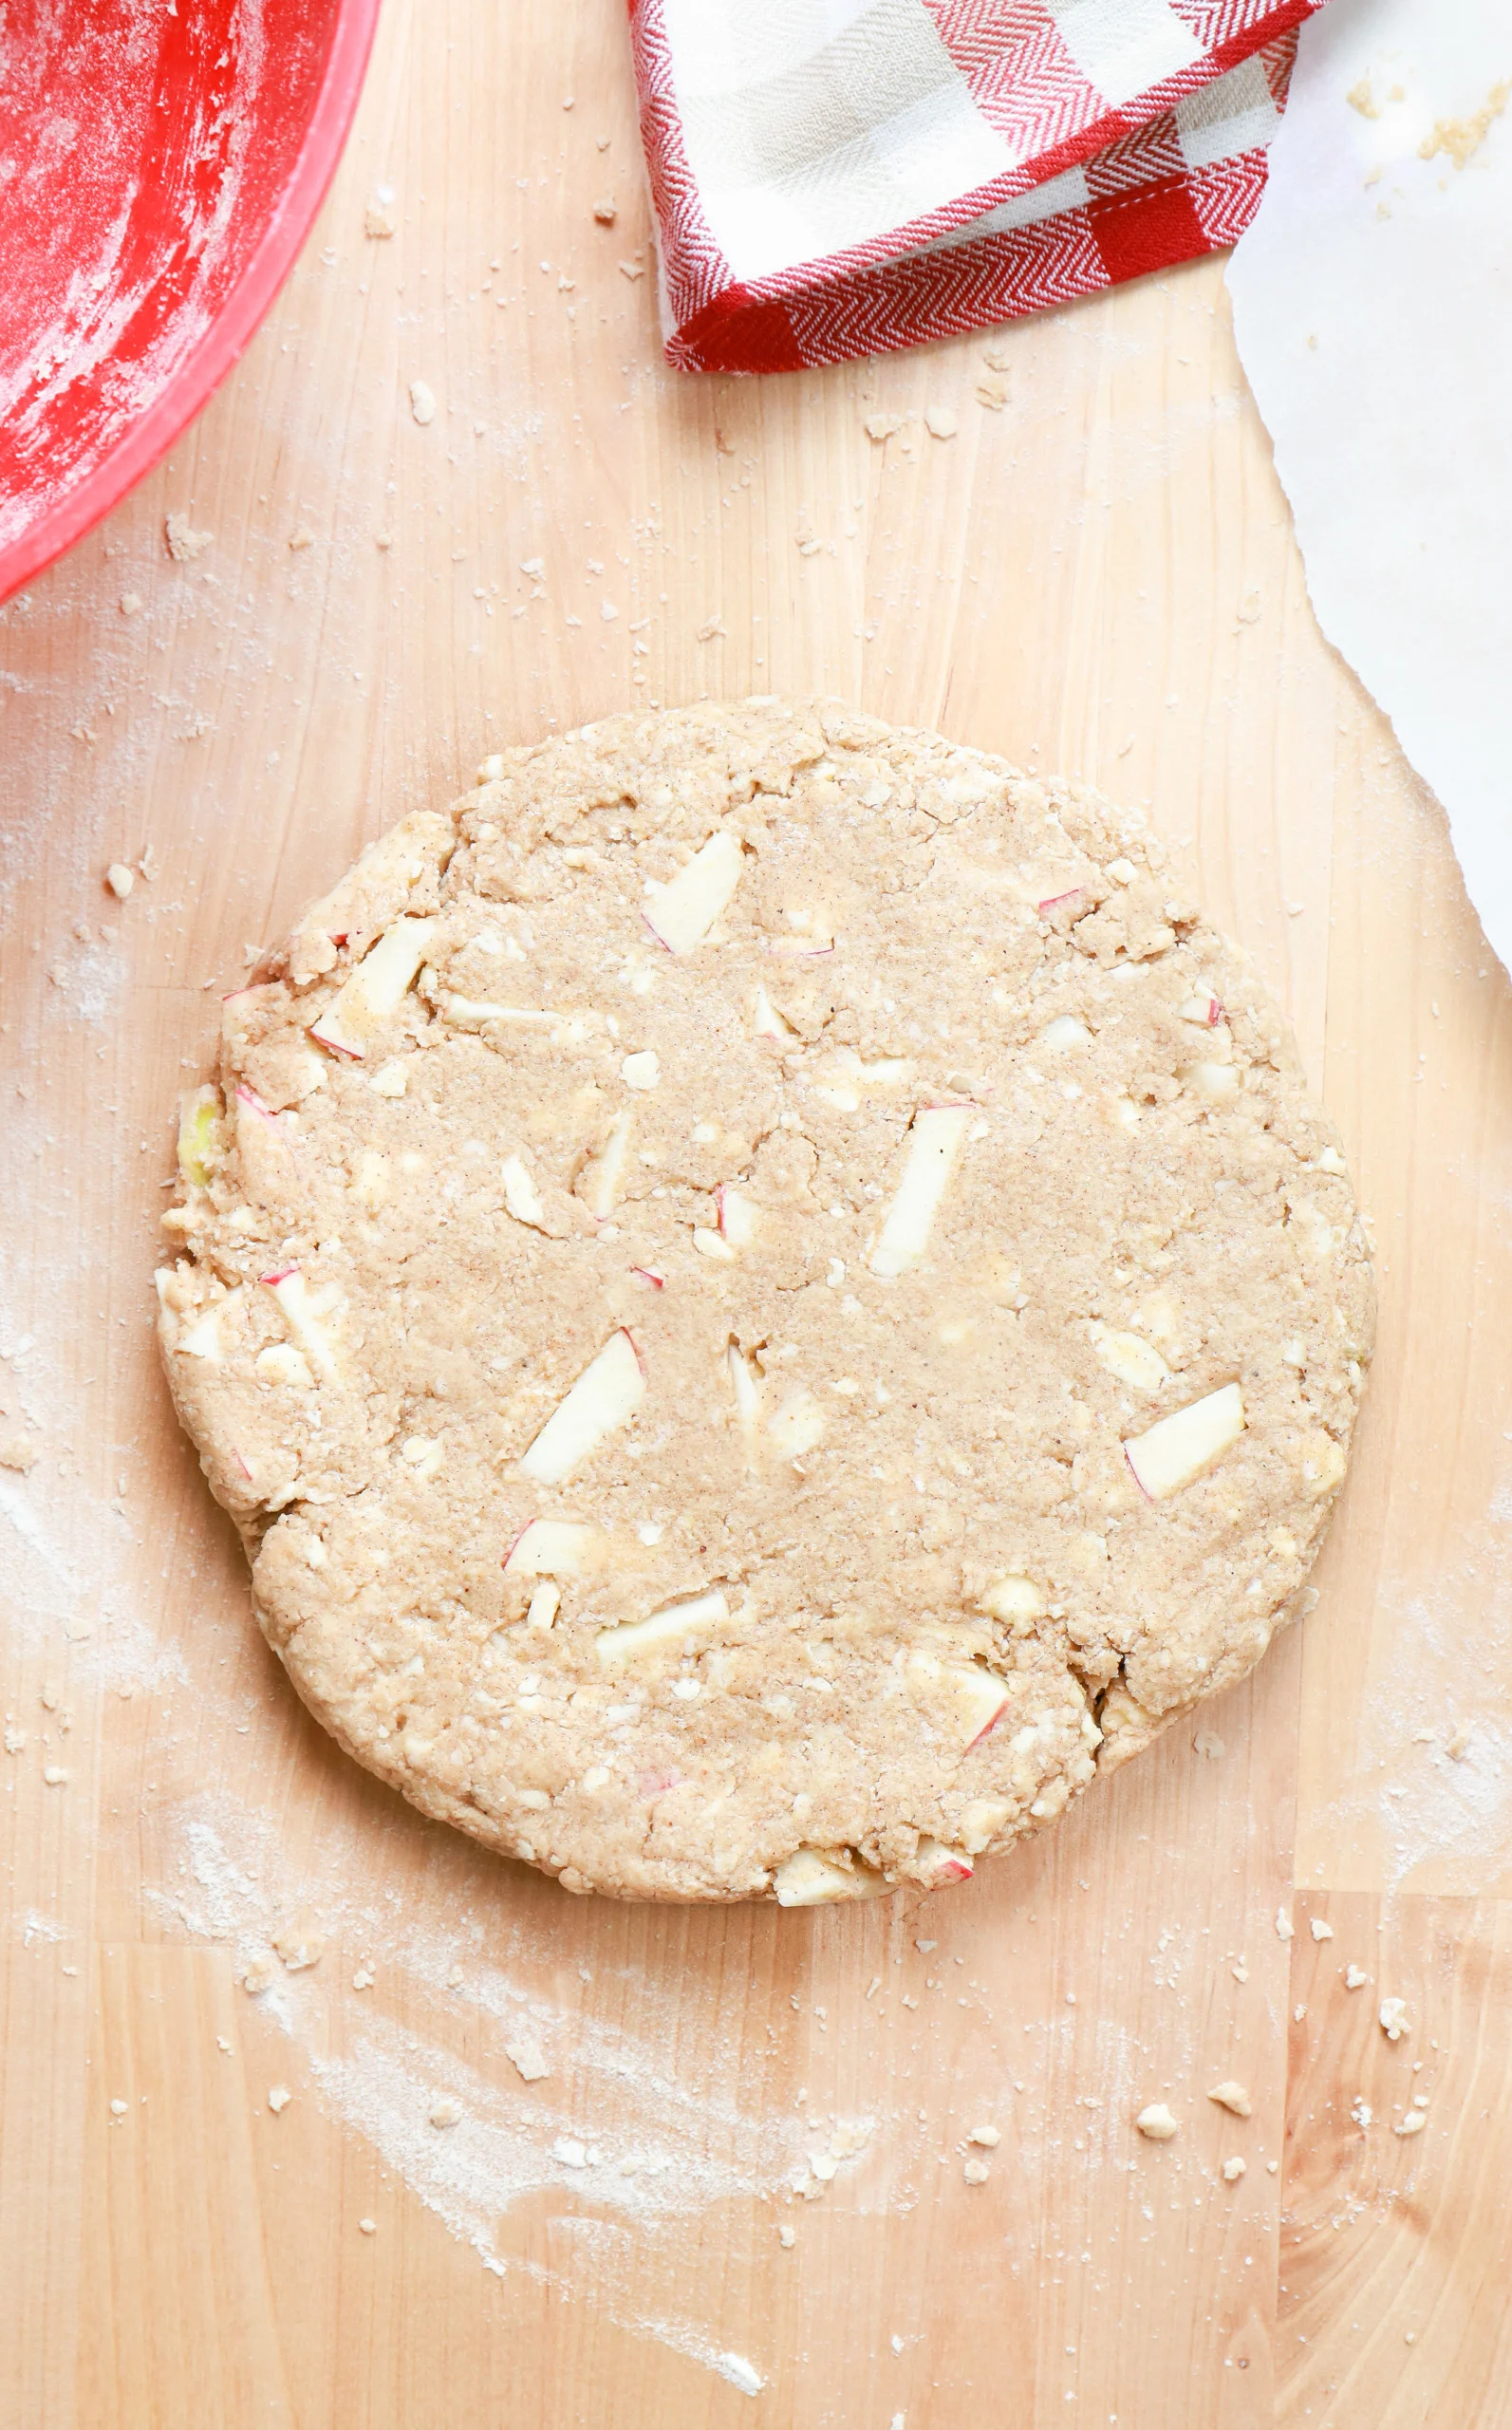 Overhead view of the apple cinnamon scone dough shaped into an eight inch circle.